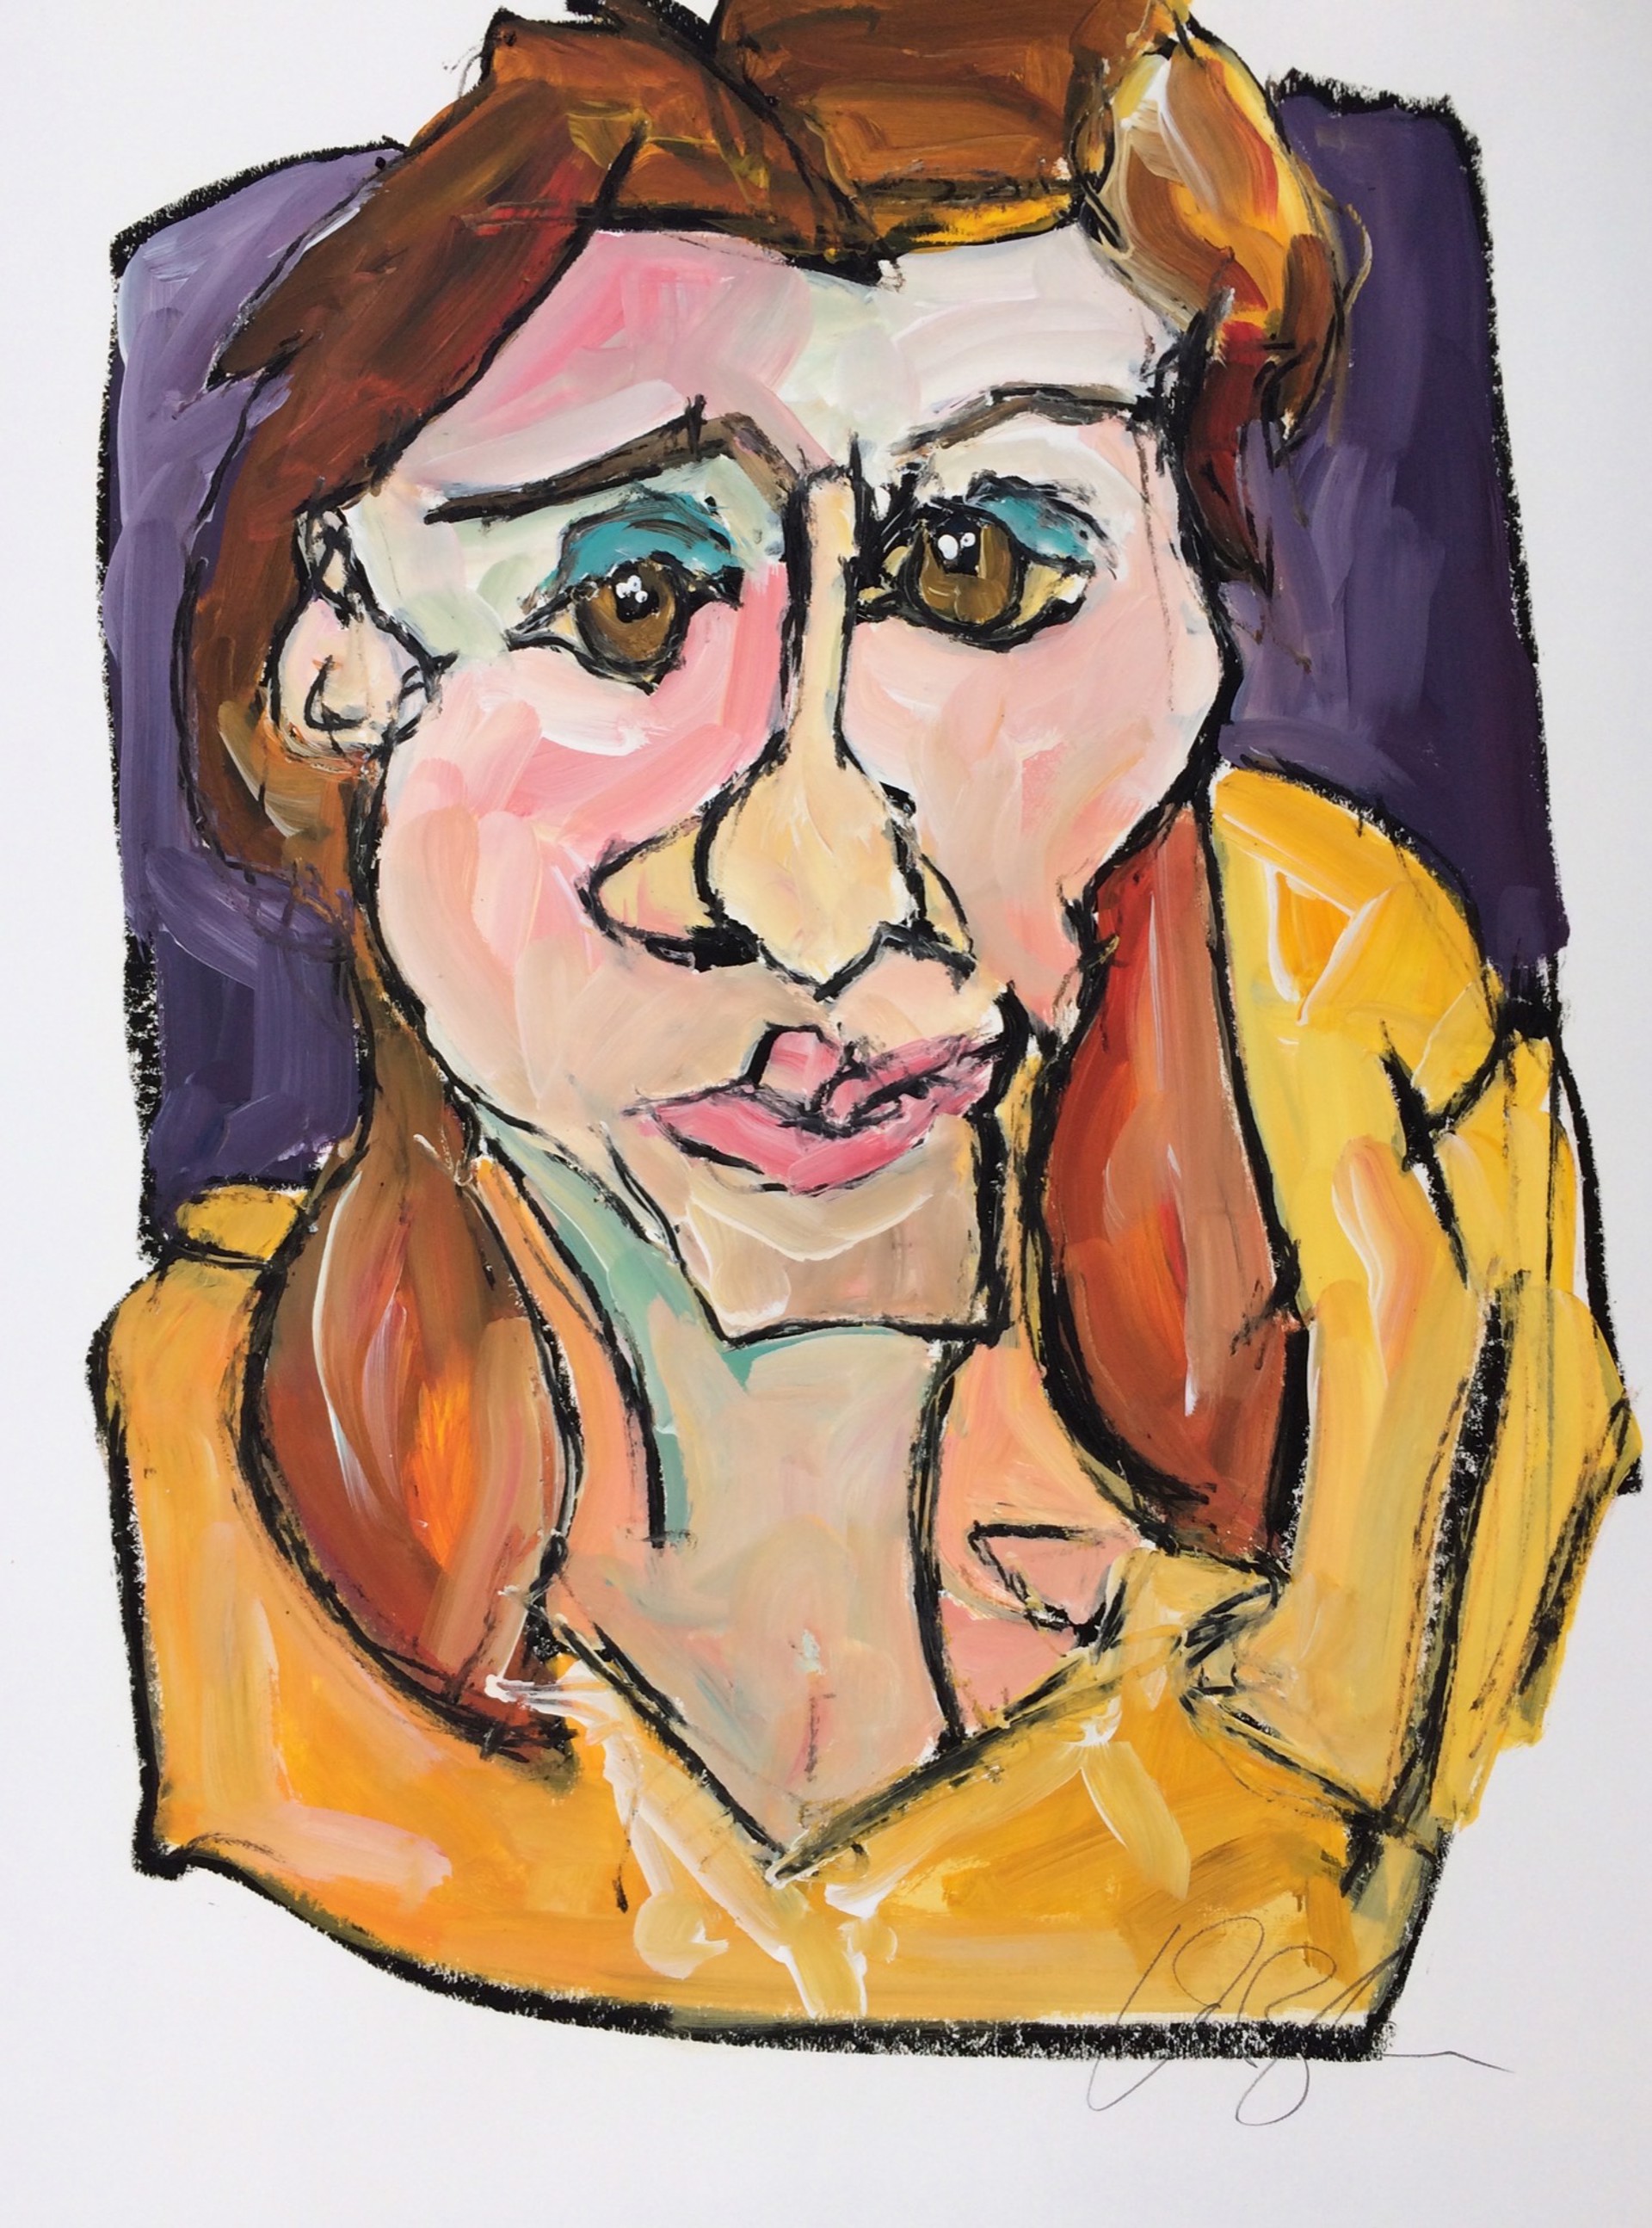 Self-Portrait Yellow Blouse and Pigtails by Rachael Van Dyke